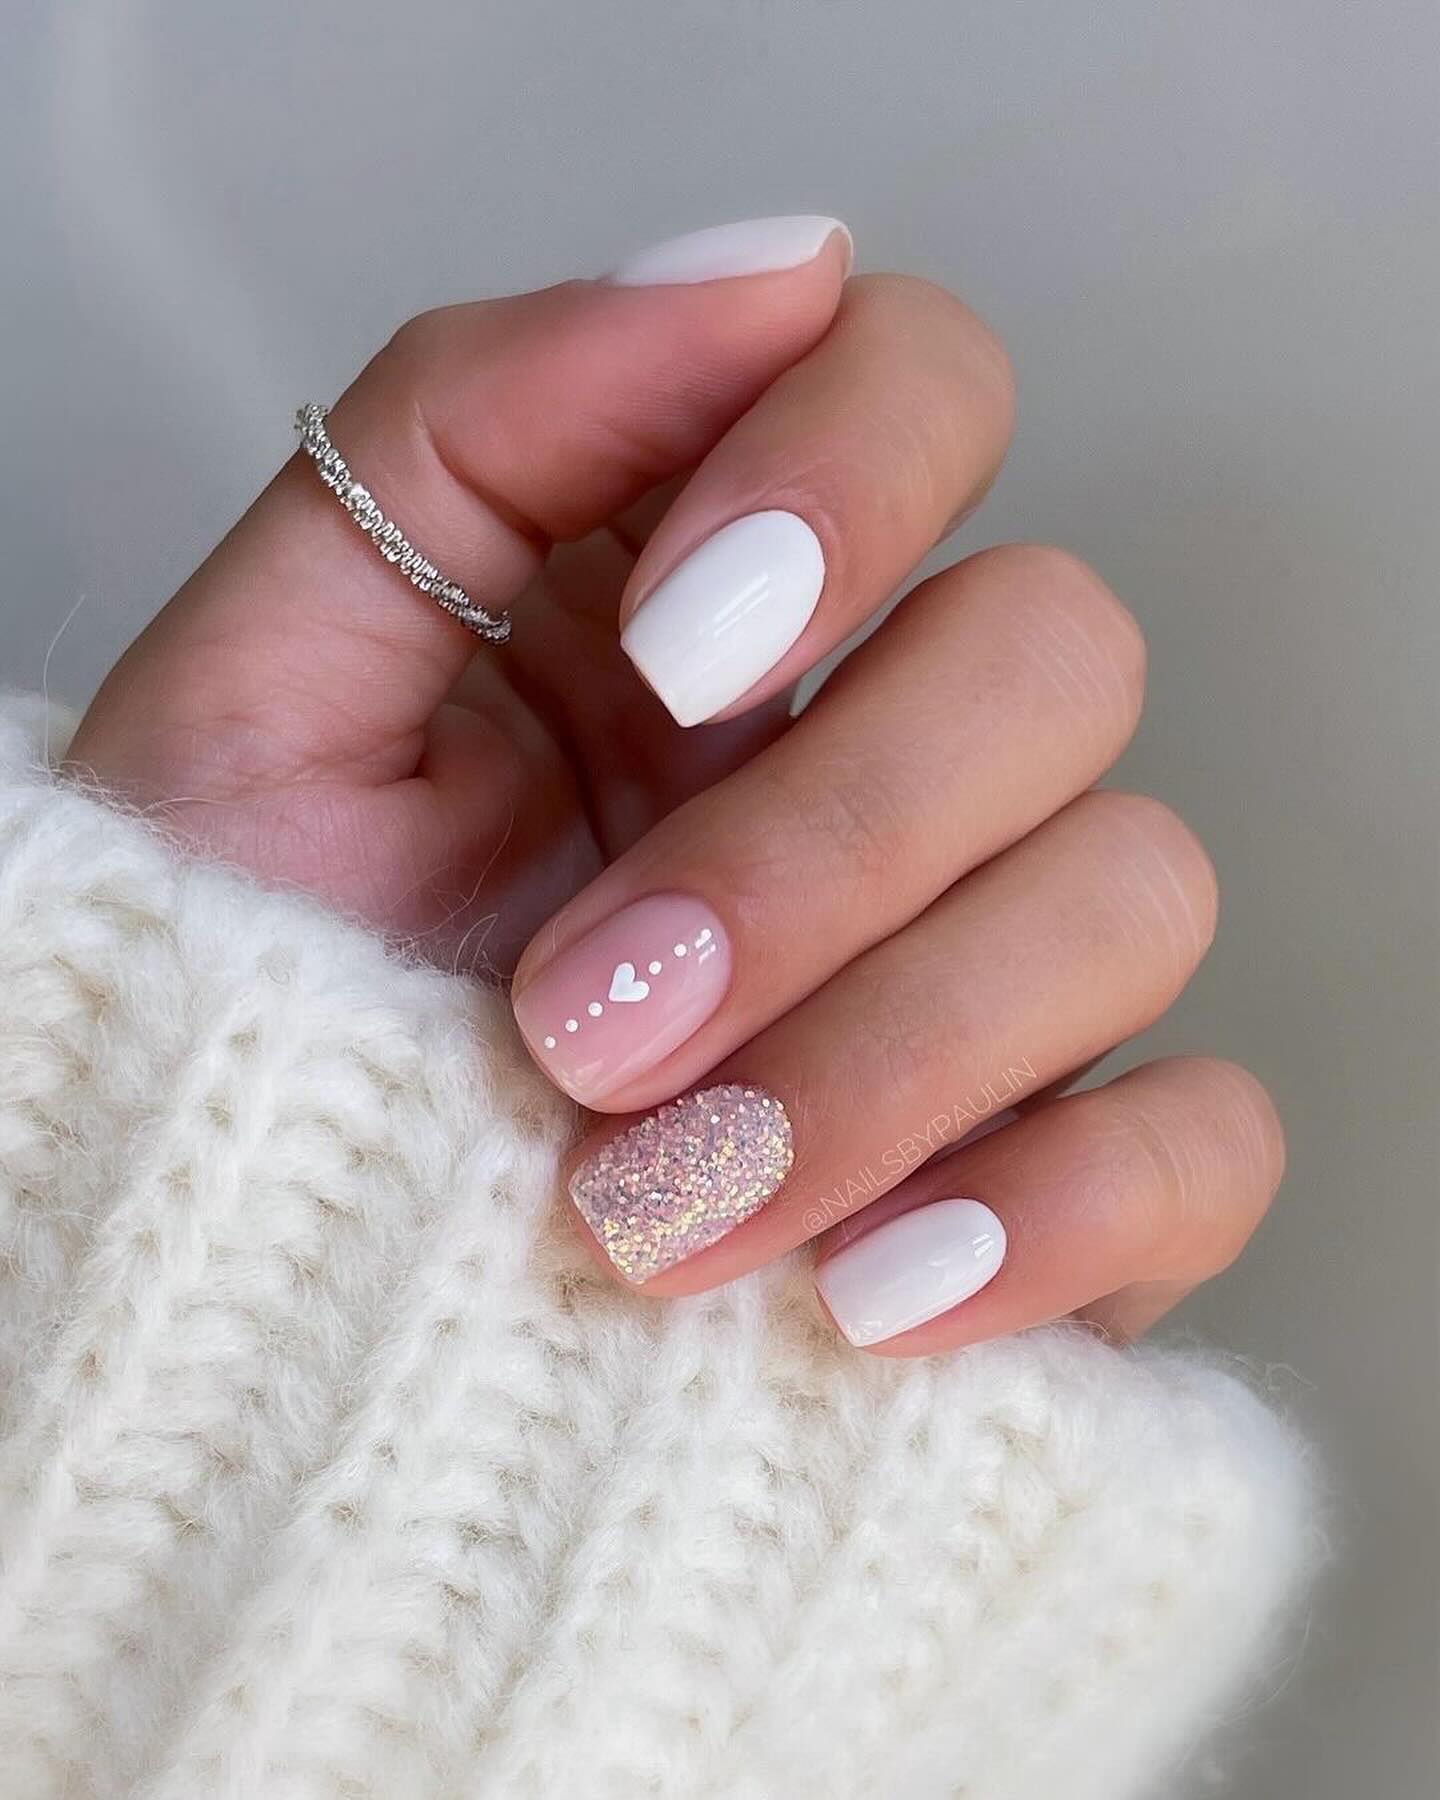 100 Pretty Spring Nail Designs To Try This Year images 42